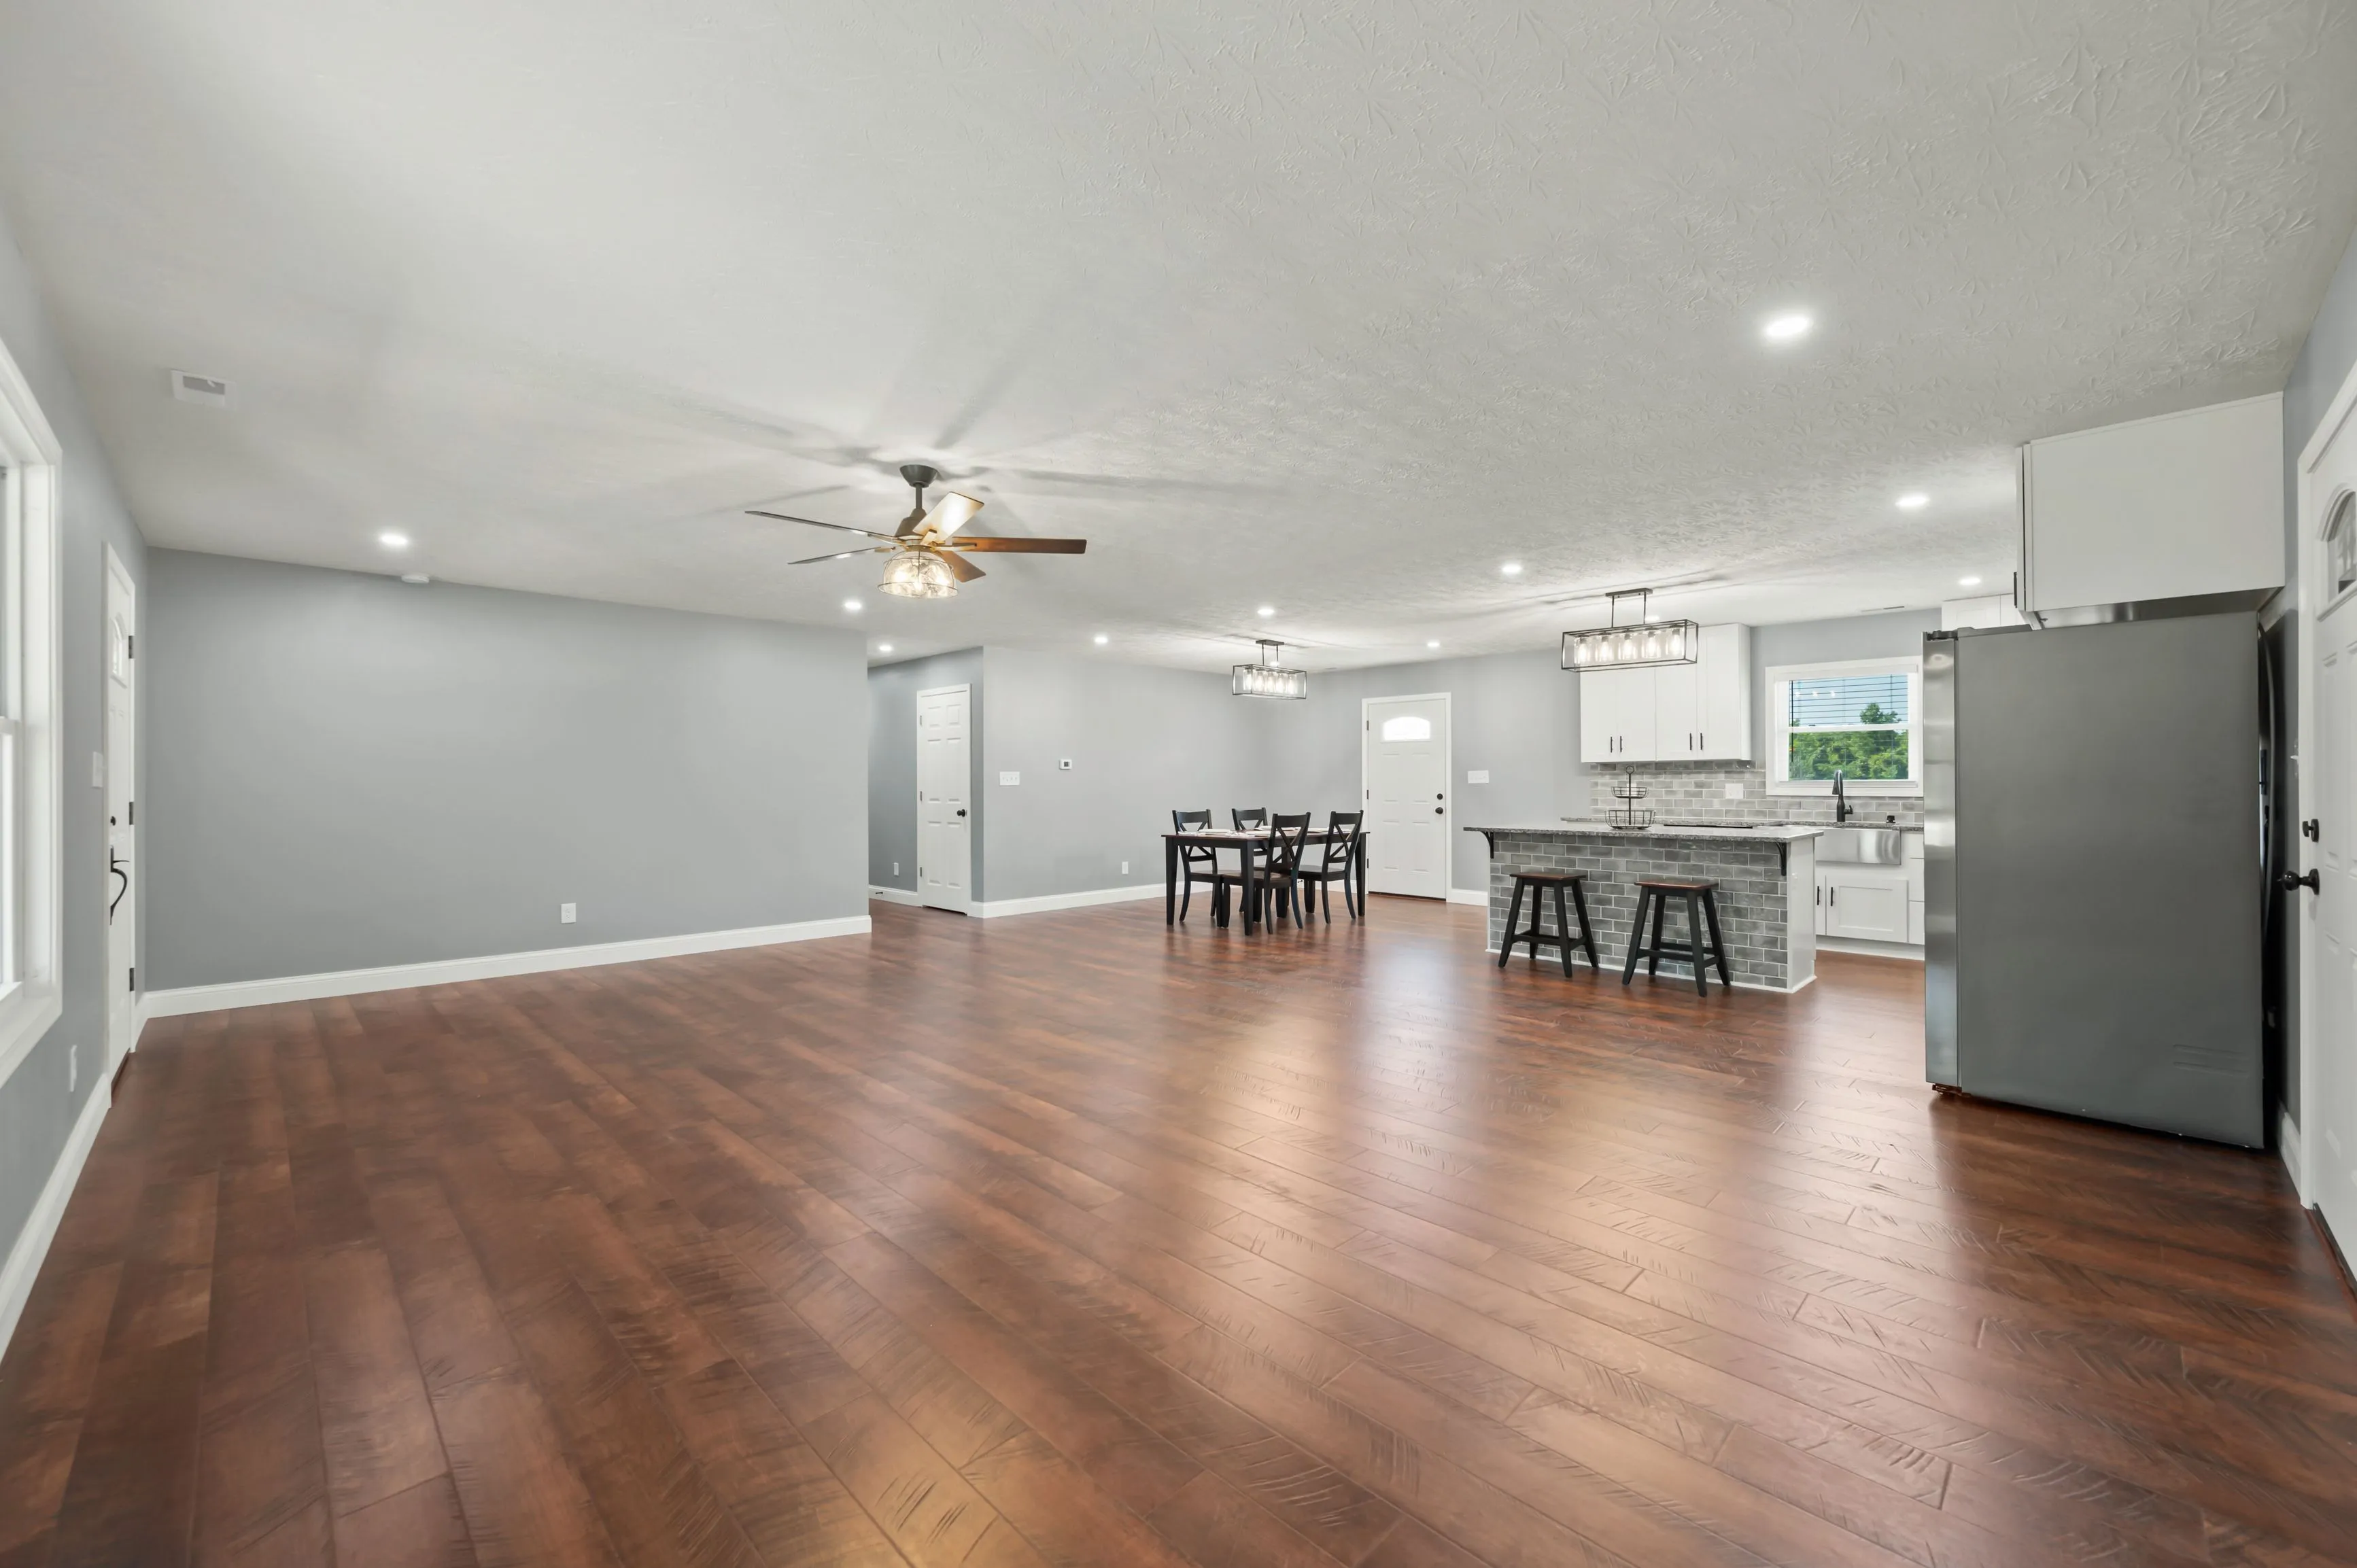 Spacious, modern kitchen with stainless steel appliances, white cabinetry, and a dining area with a dark wooden table set on polished hardwood flooring.